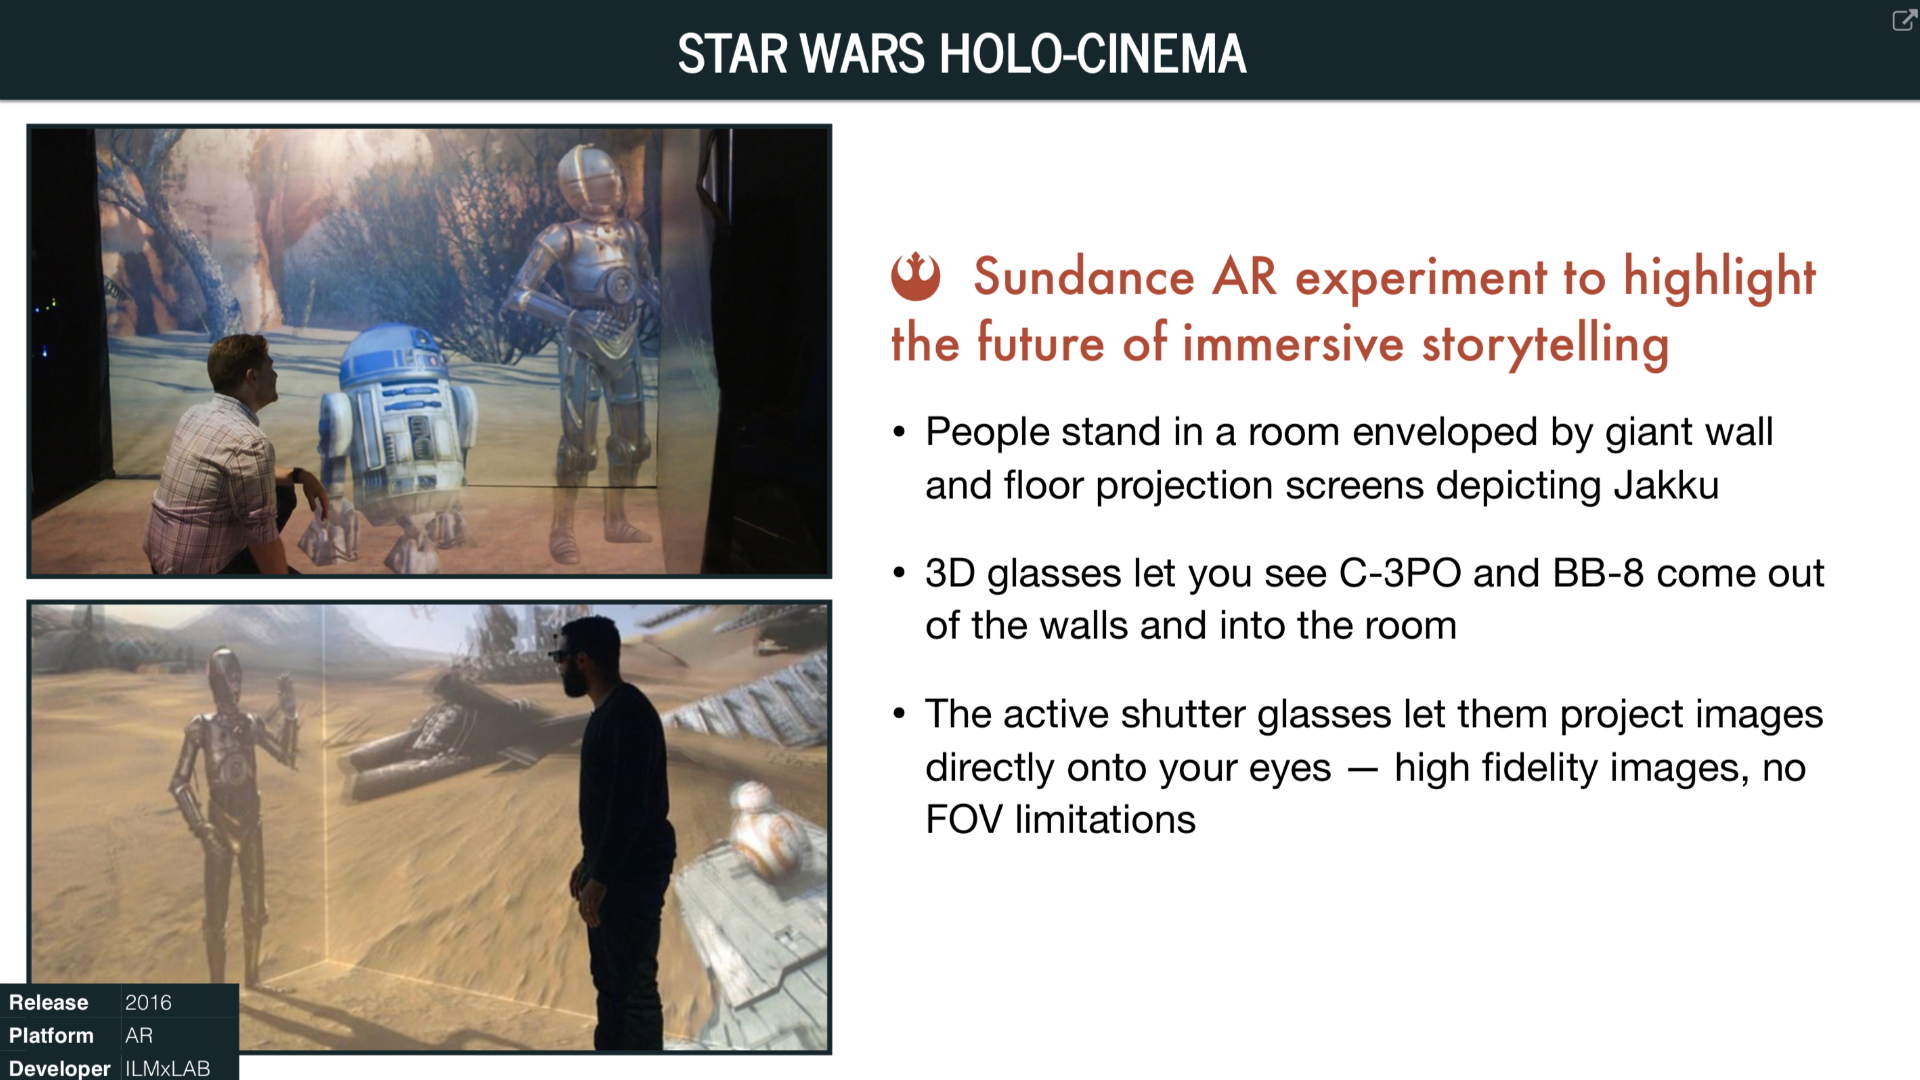 Overview of Star Wars Holo-Cinema (2016)